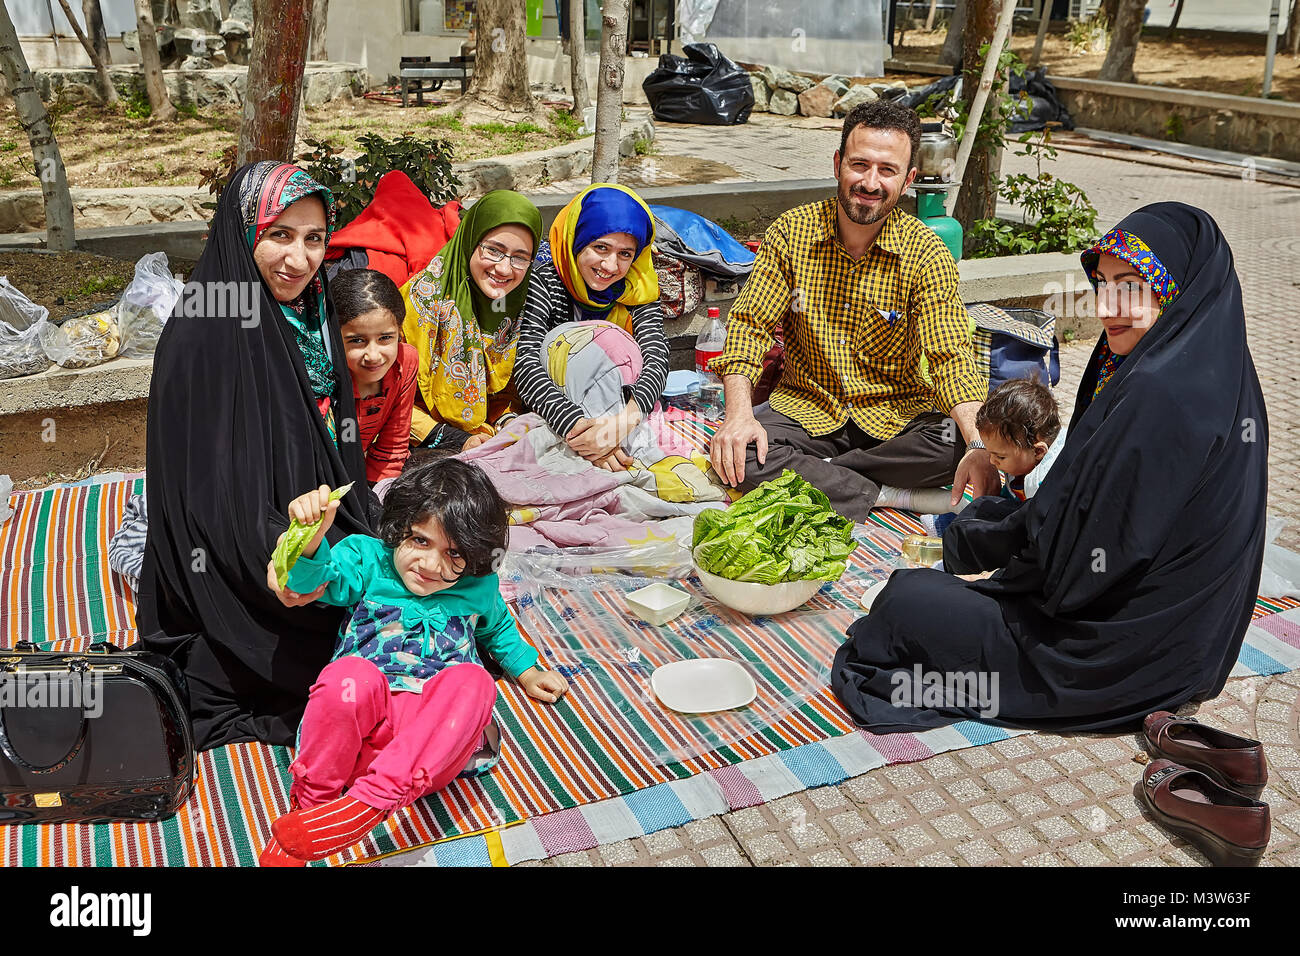 Tehran, Iran - April 28, 2017: big Iranian family is spending a day off making a picnic in the park, they are smiling and laughing. Stock Photo